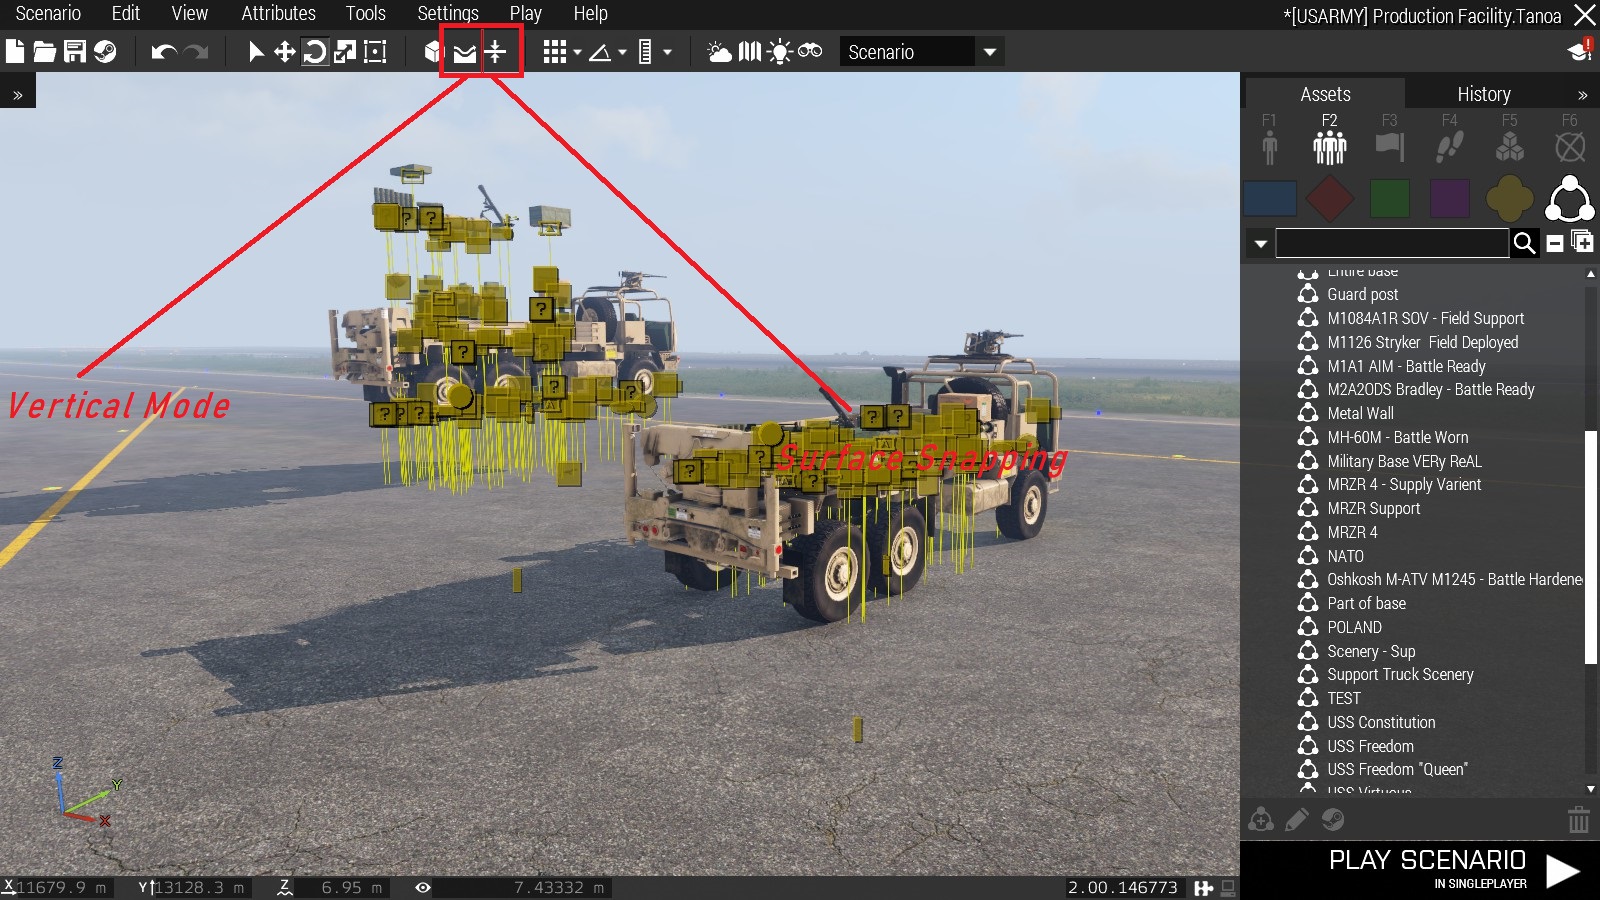 Arma 3: Eden Editor Tutorial  How to make a Mobile Respawn Point without  external Scripts [Old] 